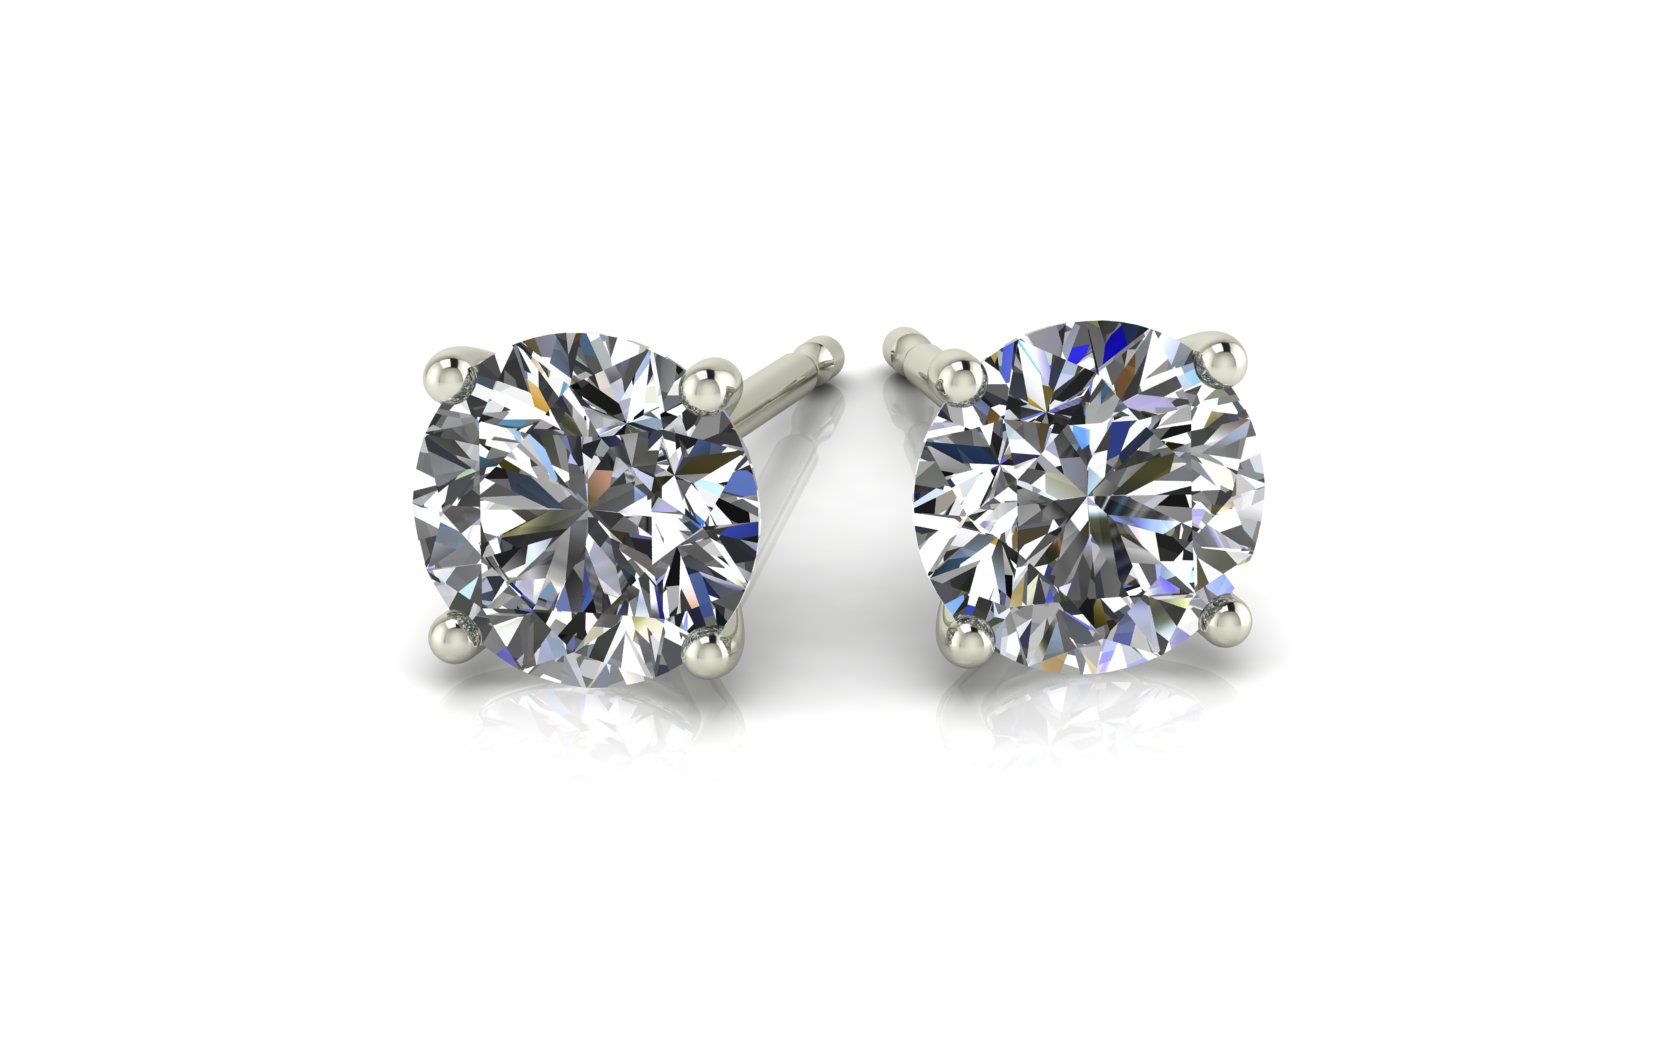 A dazzling pair of round cut 1 carat stud earrings.